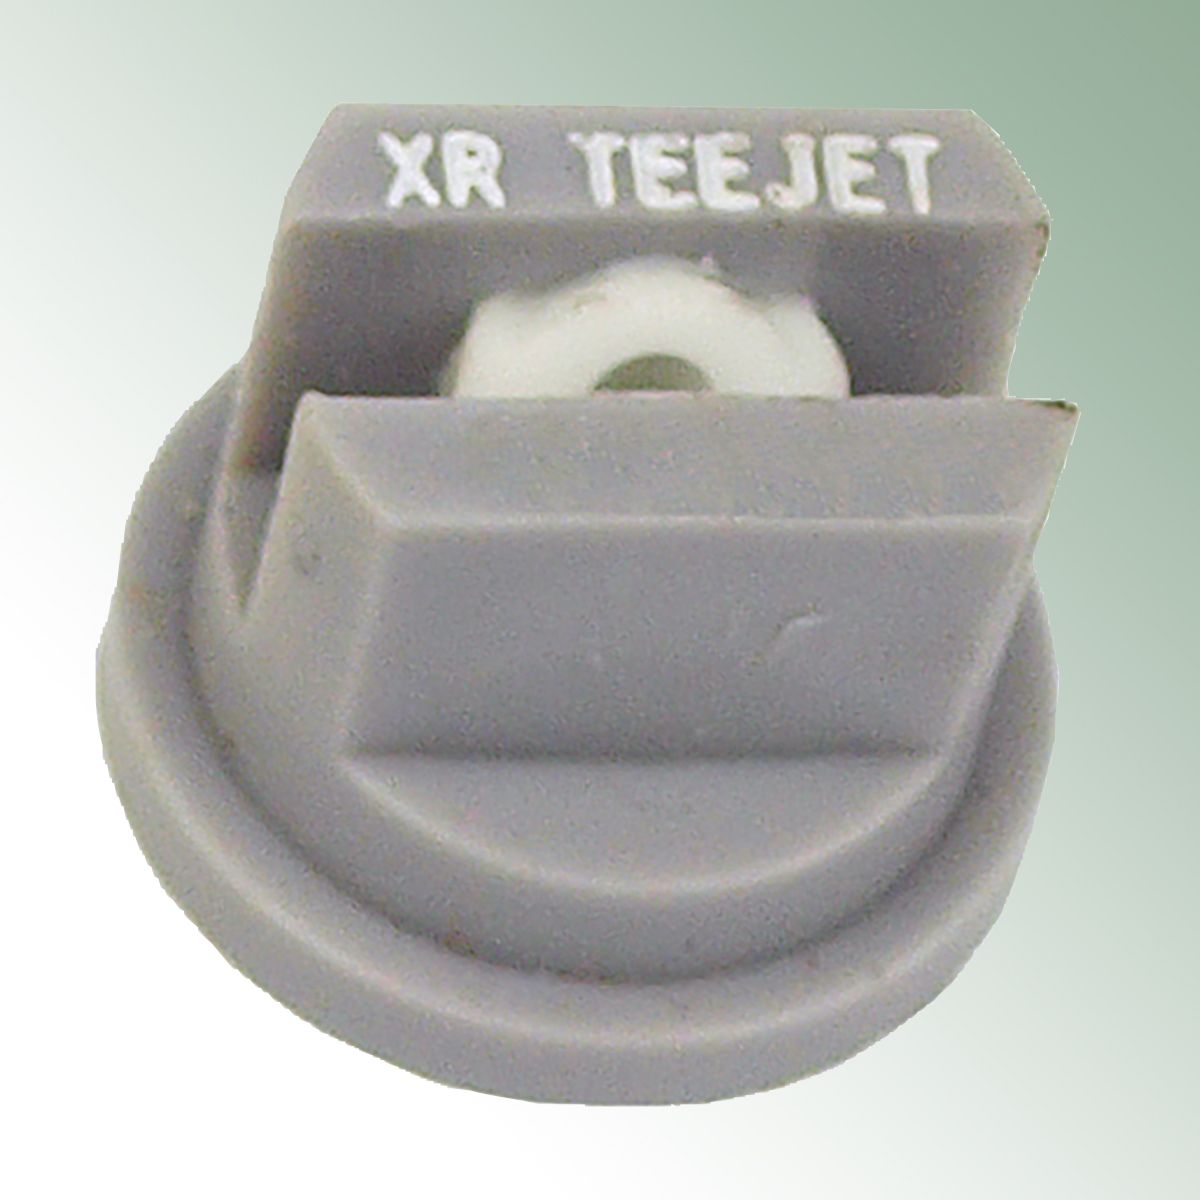 Mouth piece Grey for Teejet- nozzle, Spraying angle 110° Size 06, Ceramic Insert